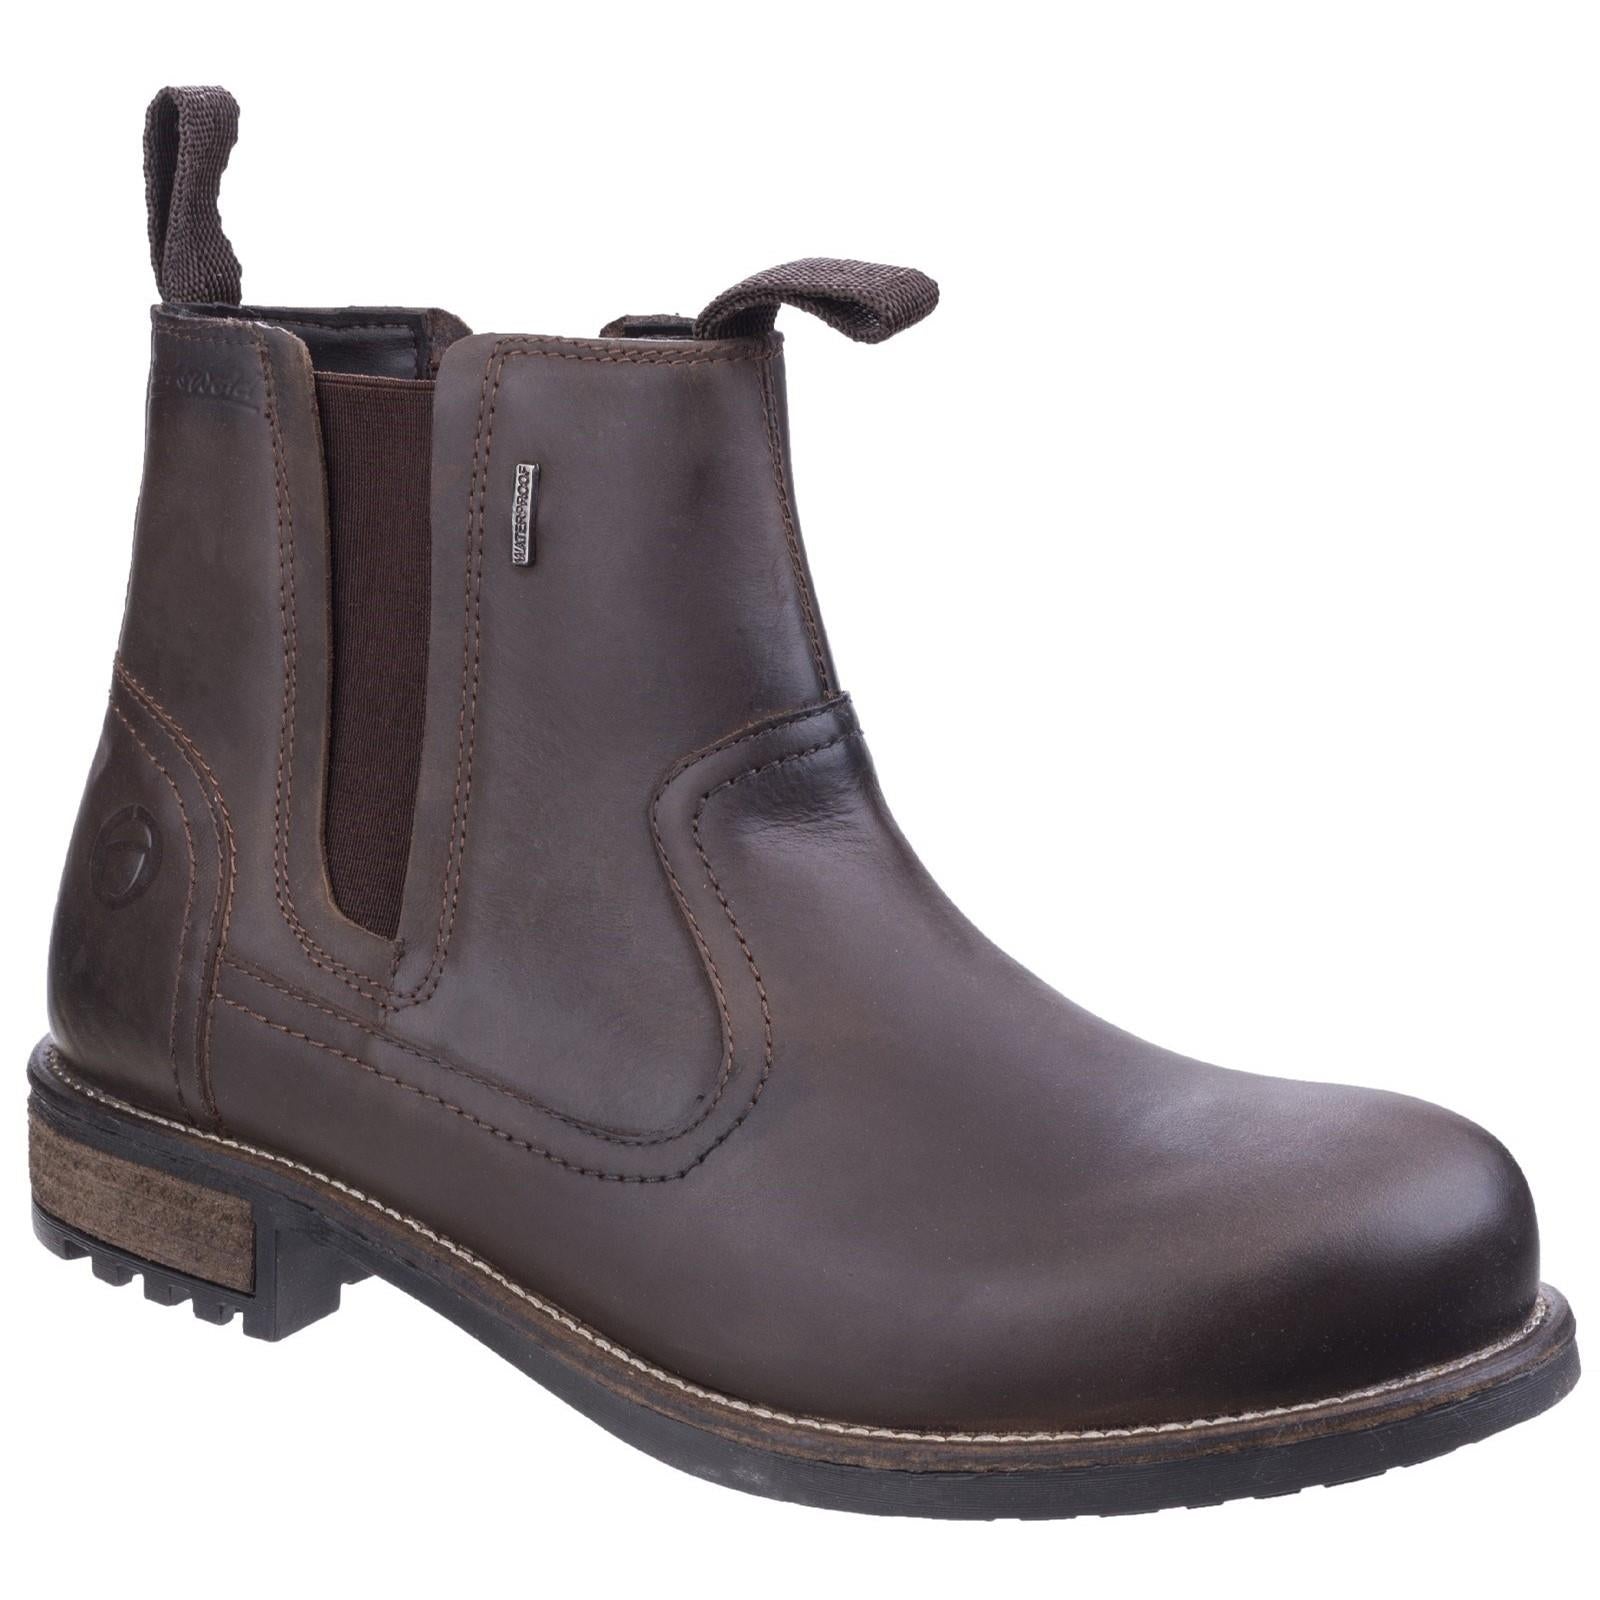 Cotswold Worcester brown leather waterproof men's country chelsea dealer boot